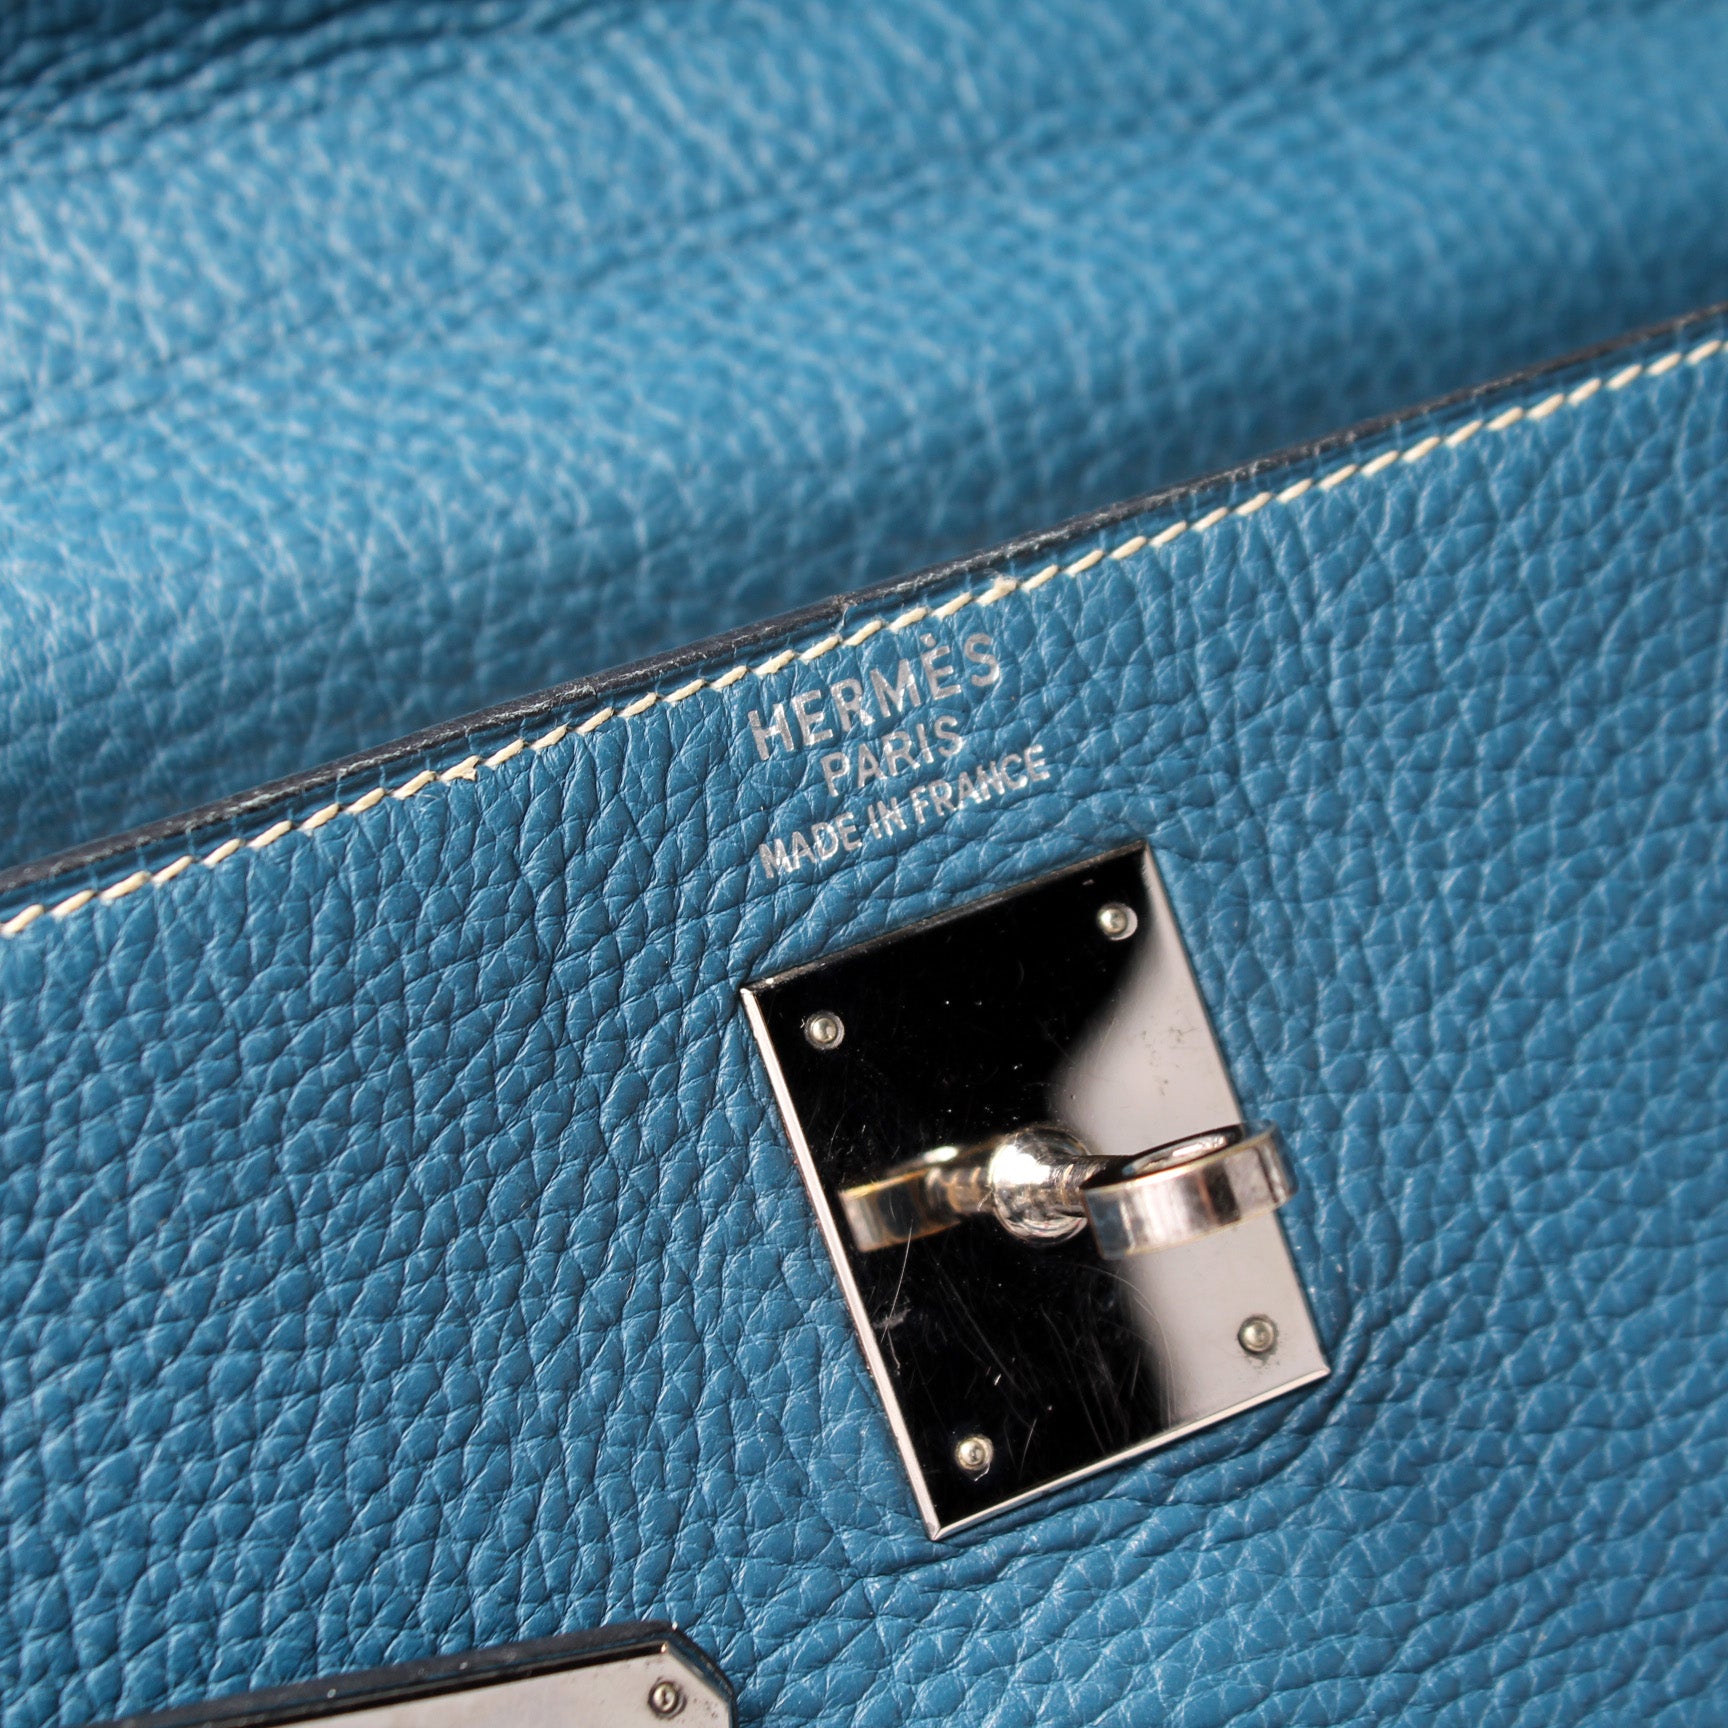 Saclab-Official on X: An Hermès Kelly 35 Retourne handcrafted from Togo  calfskin in Blue Jean, a sophisticated day-to-day shade of blue. Shop this  Kelly bag and more on   / X